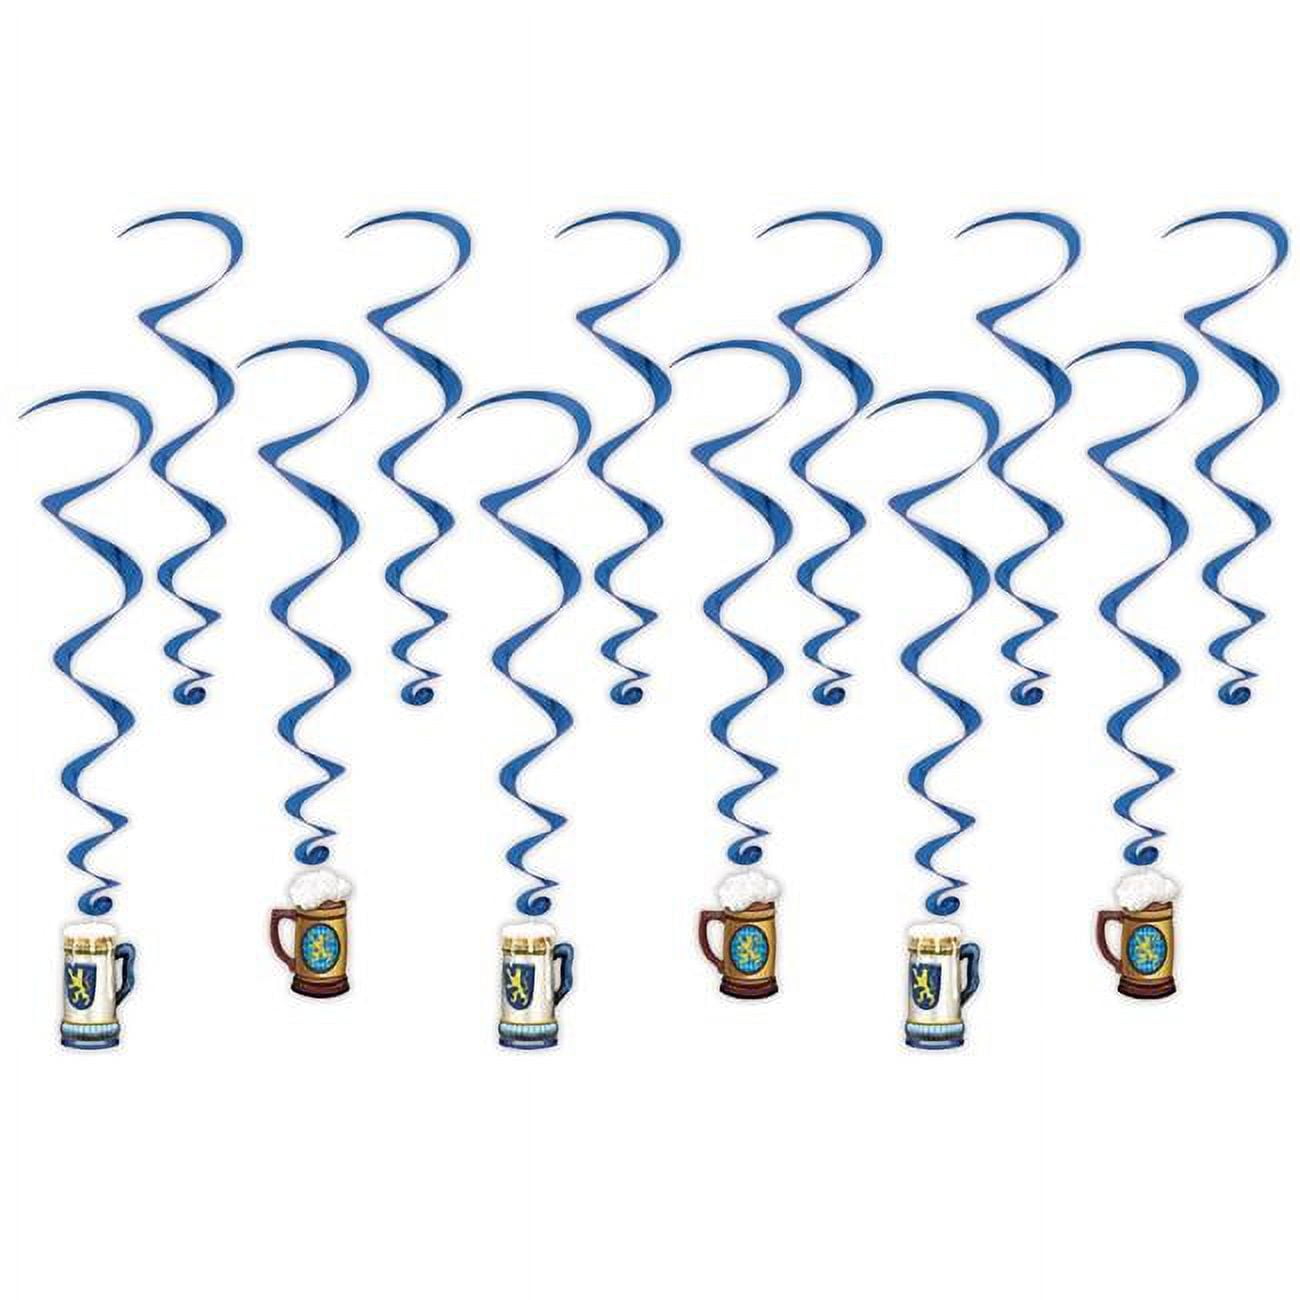 Picture of Beistle 53599 17.5 x 33.75 in. Oktoberfest Whirls Hanging Party Decoration